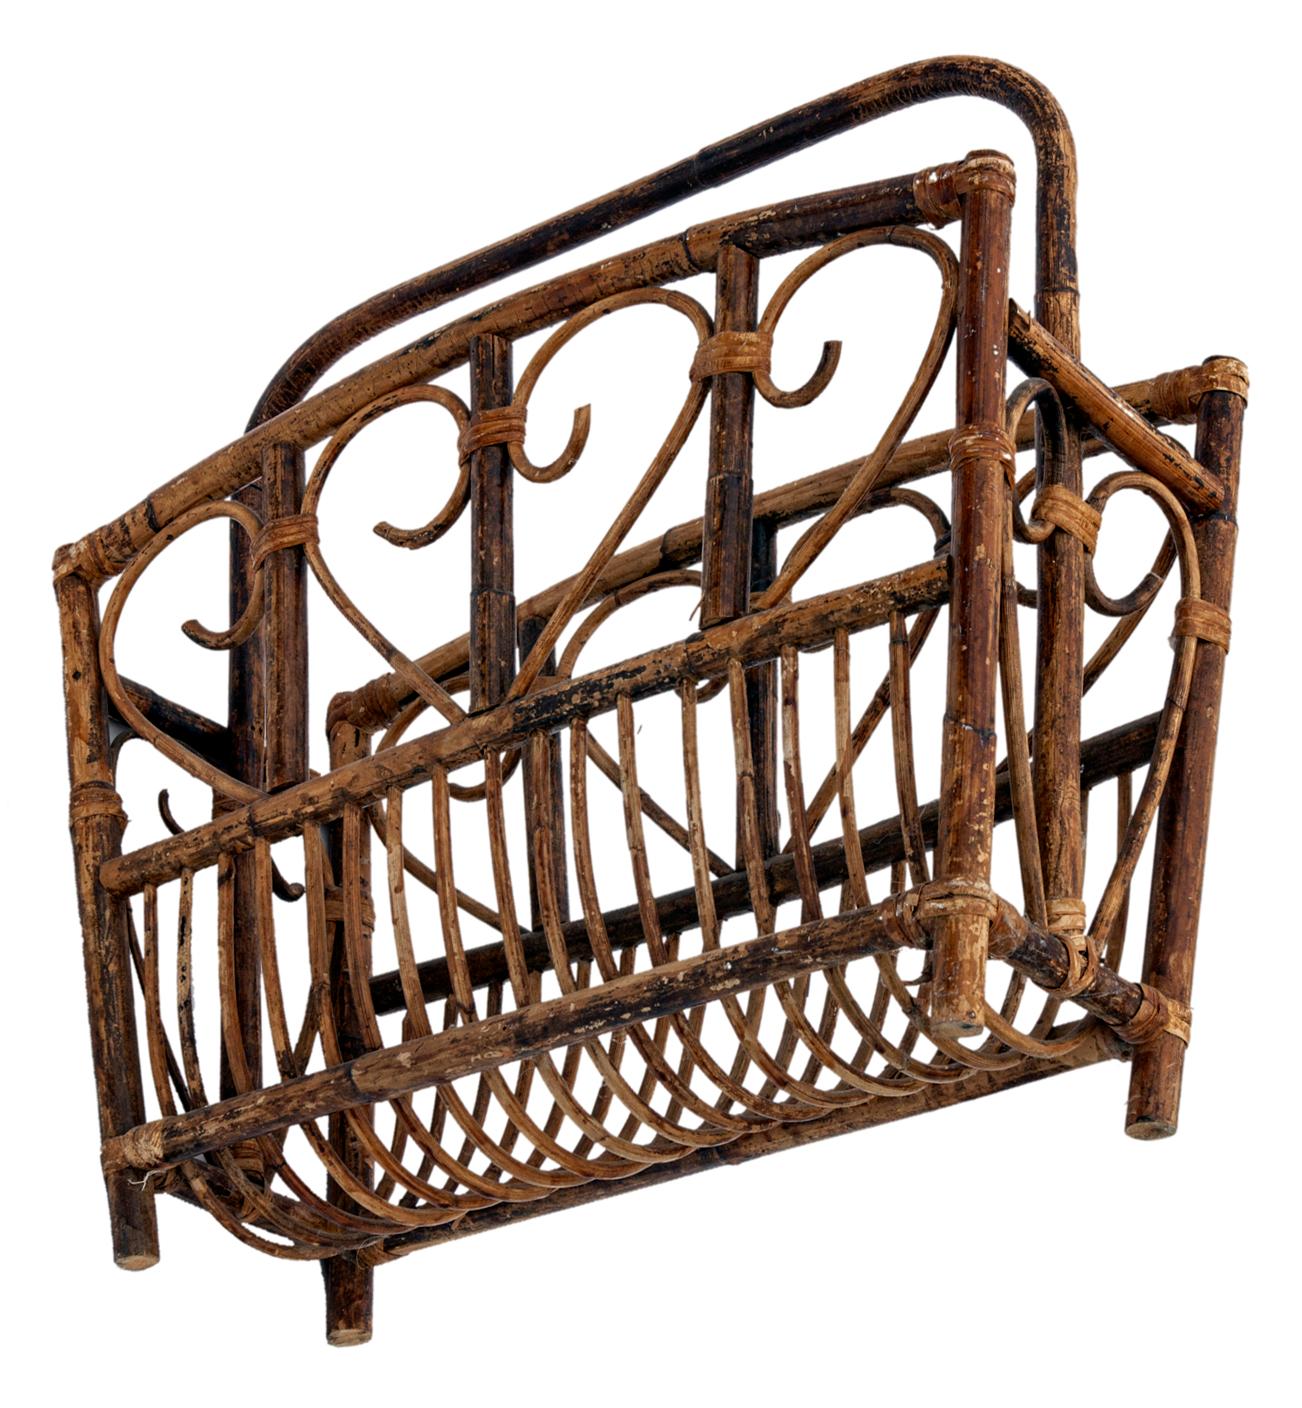 1950s Bent Bamboo Magazine Rack In Good Condition For Sale In Malibu, CA